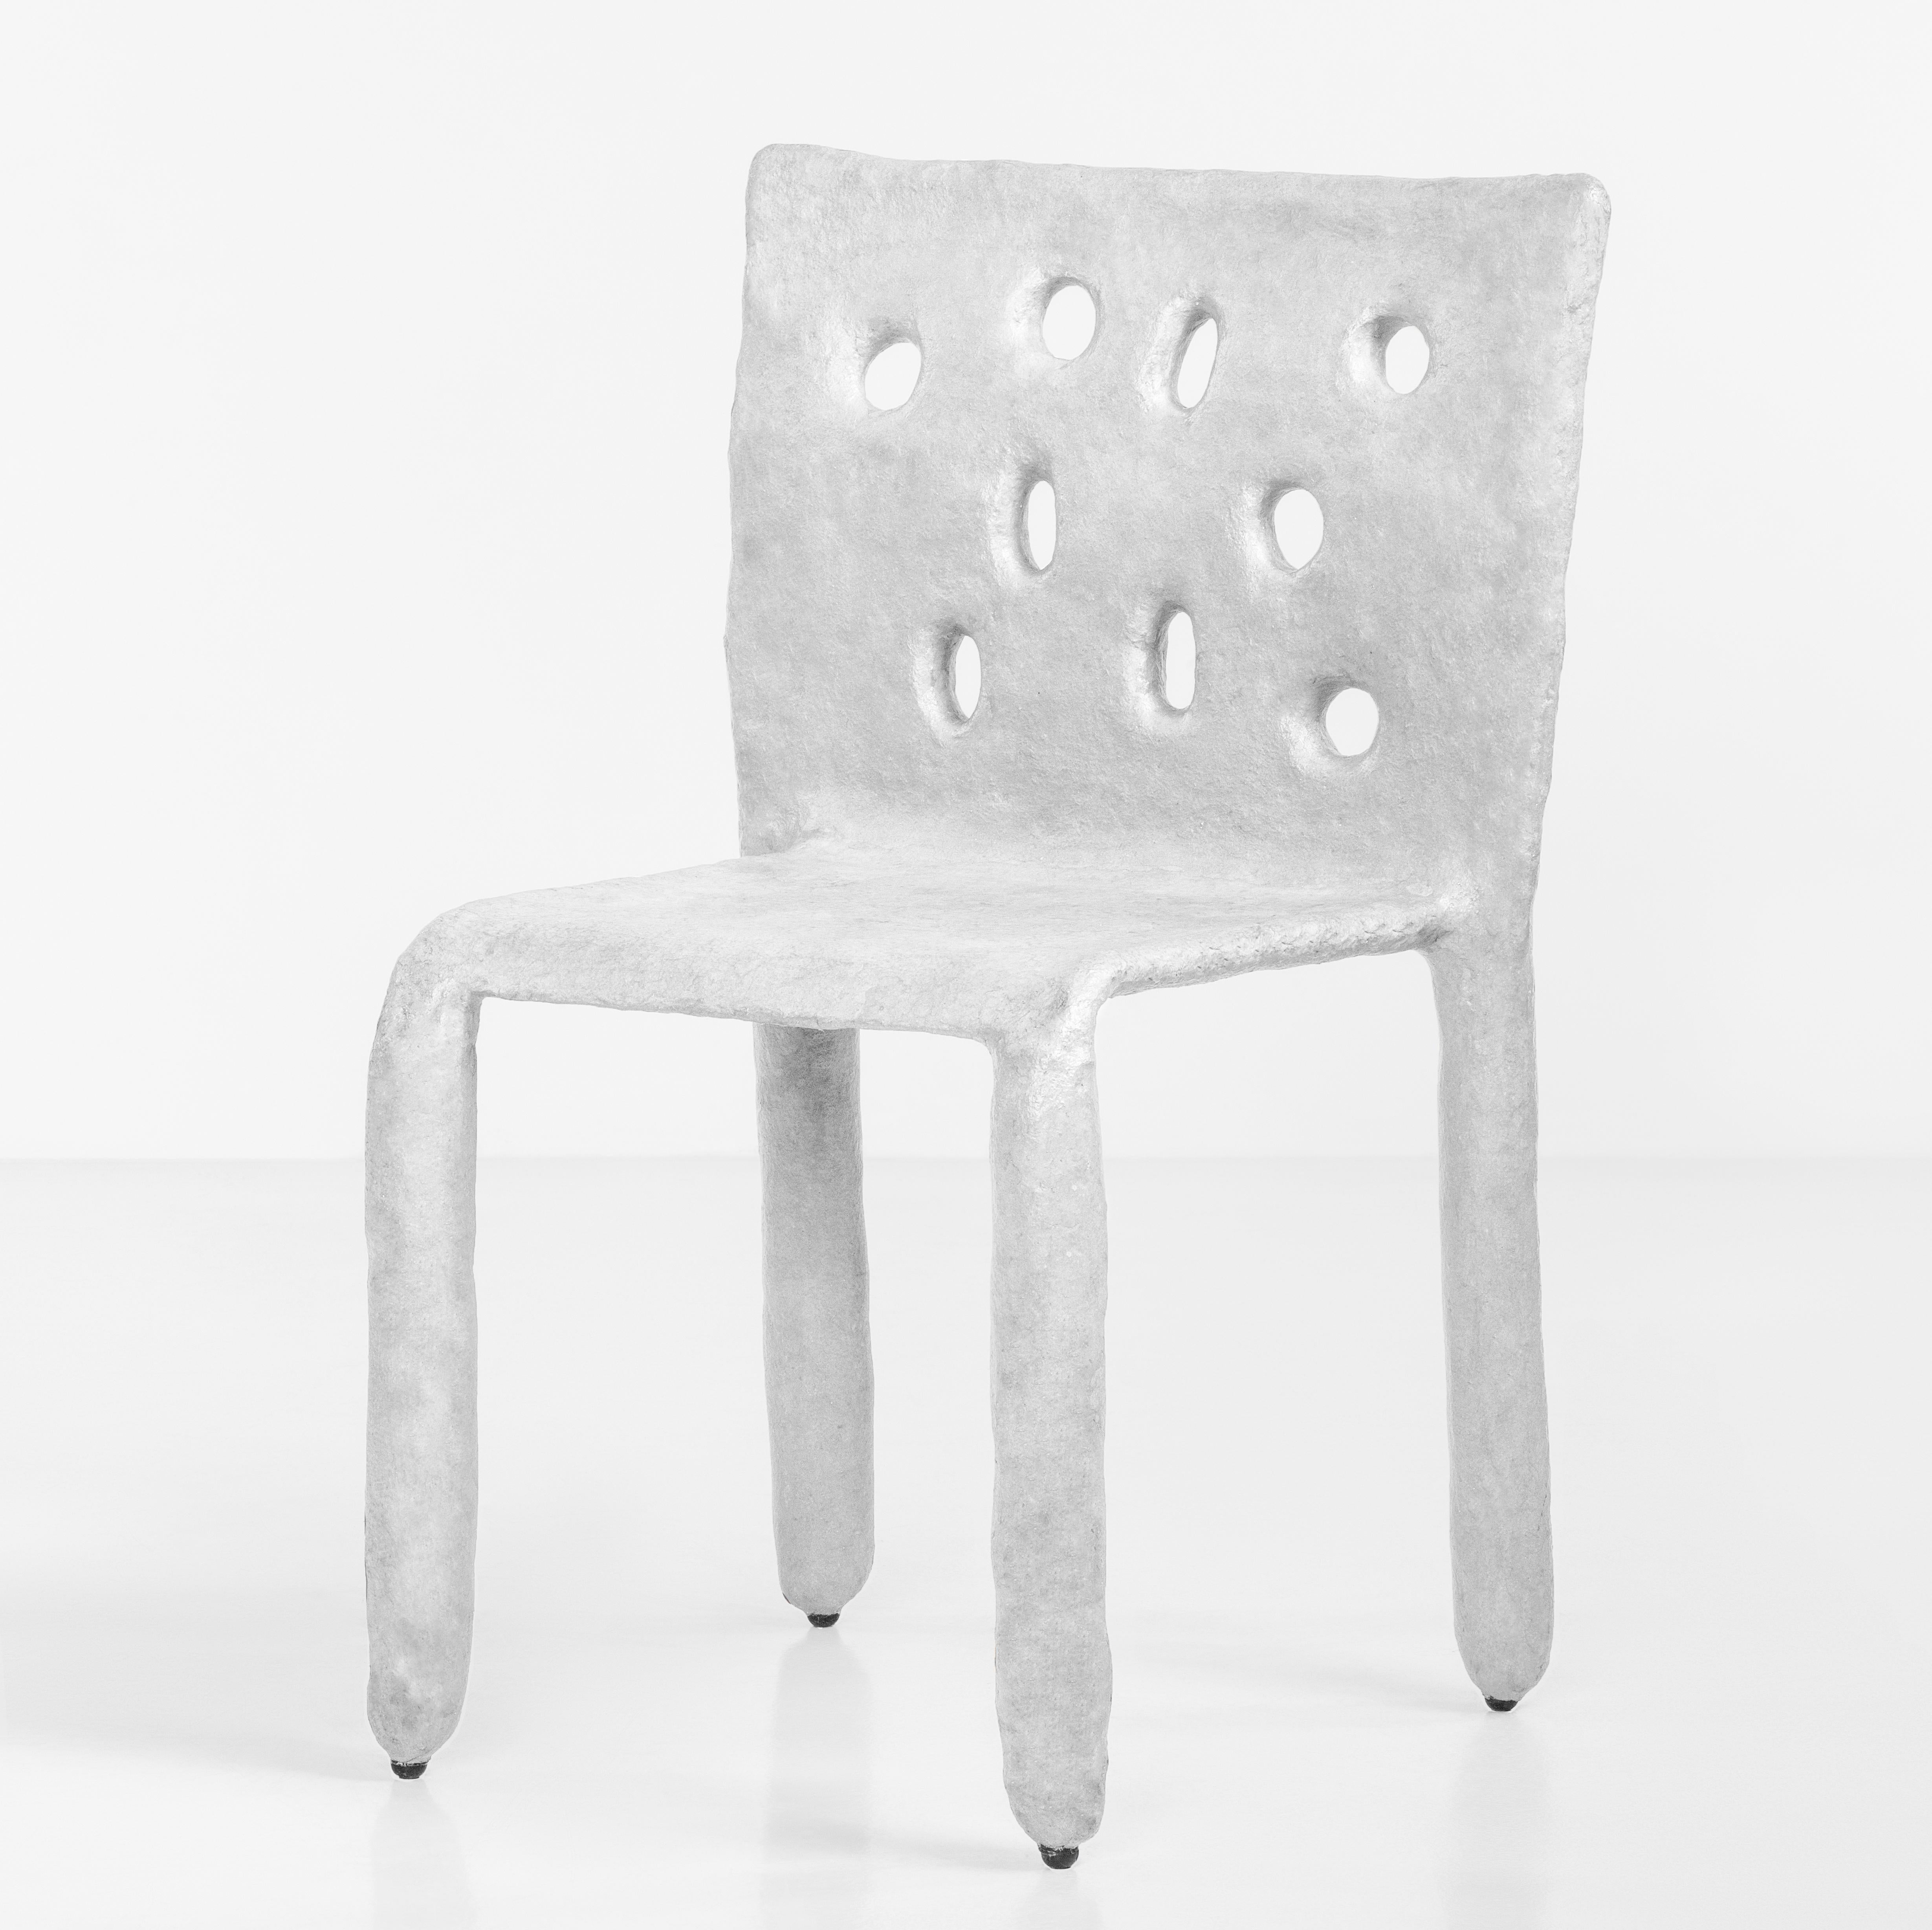 Sculpted Outdoor contemporary chair by FAINA
Design: Victoriya Yakusha
Material: steel, flax rubber, biopolymer, cellulose
Dimensions: Height 82 x width 54 x legs depth 45 cm
 Weight: 15 kilos.

Made in the style of ethnic minimalism, the